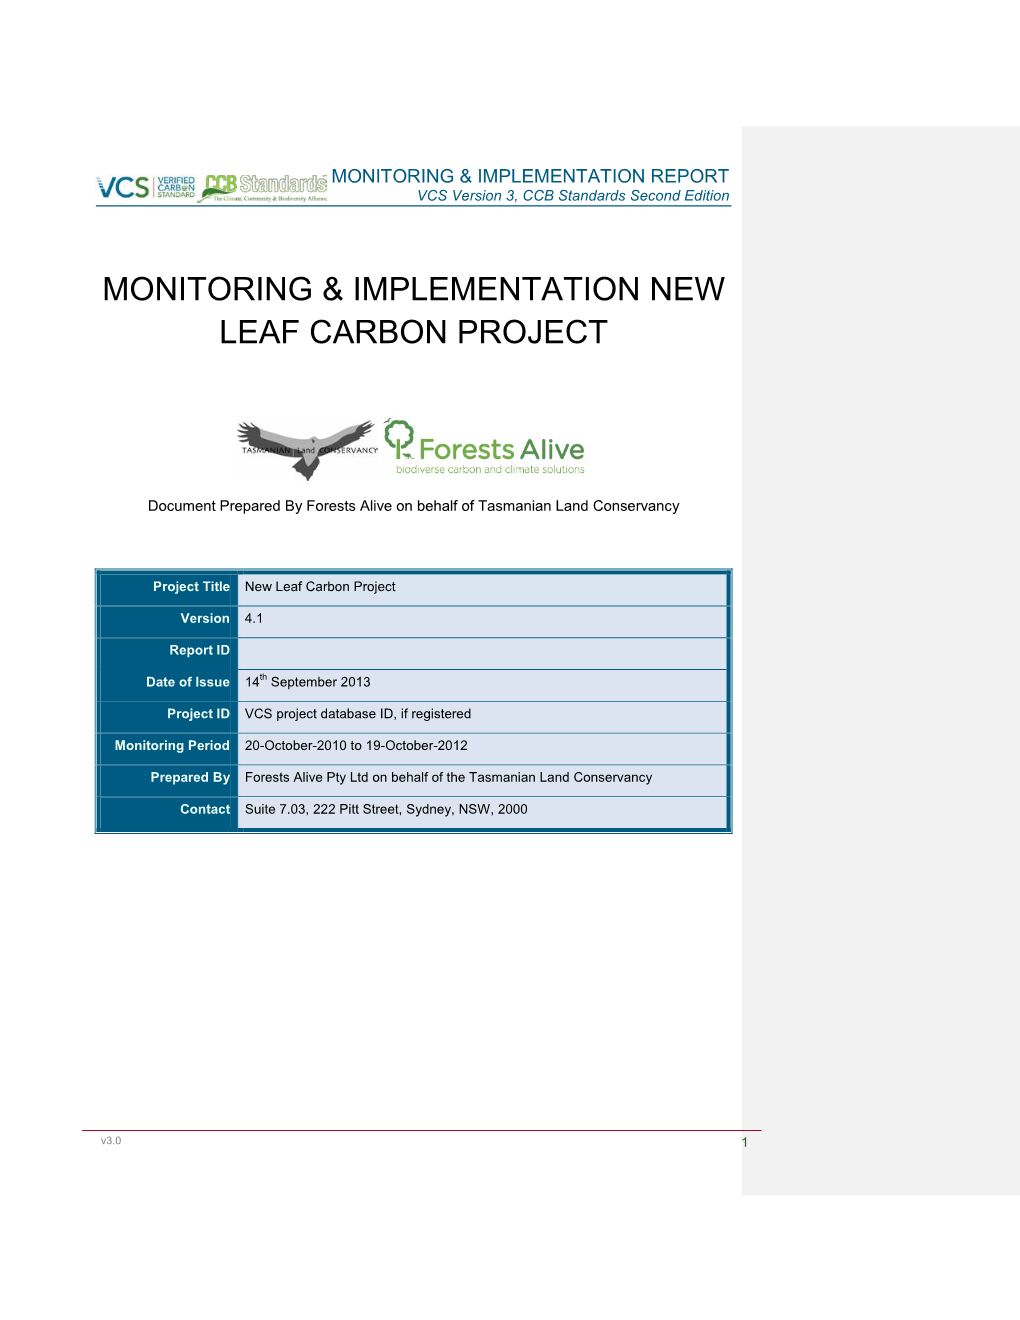 Monitoring & Implementation New Leaf Carbon Project